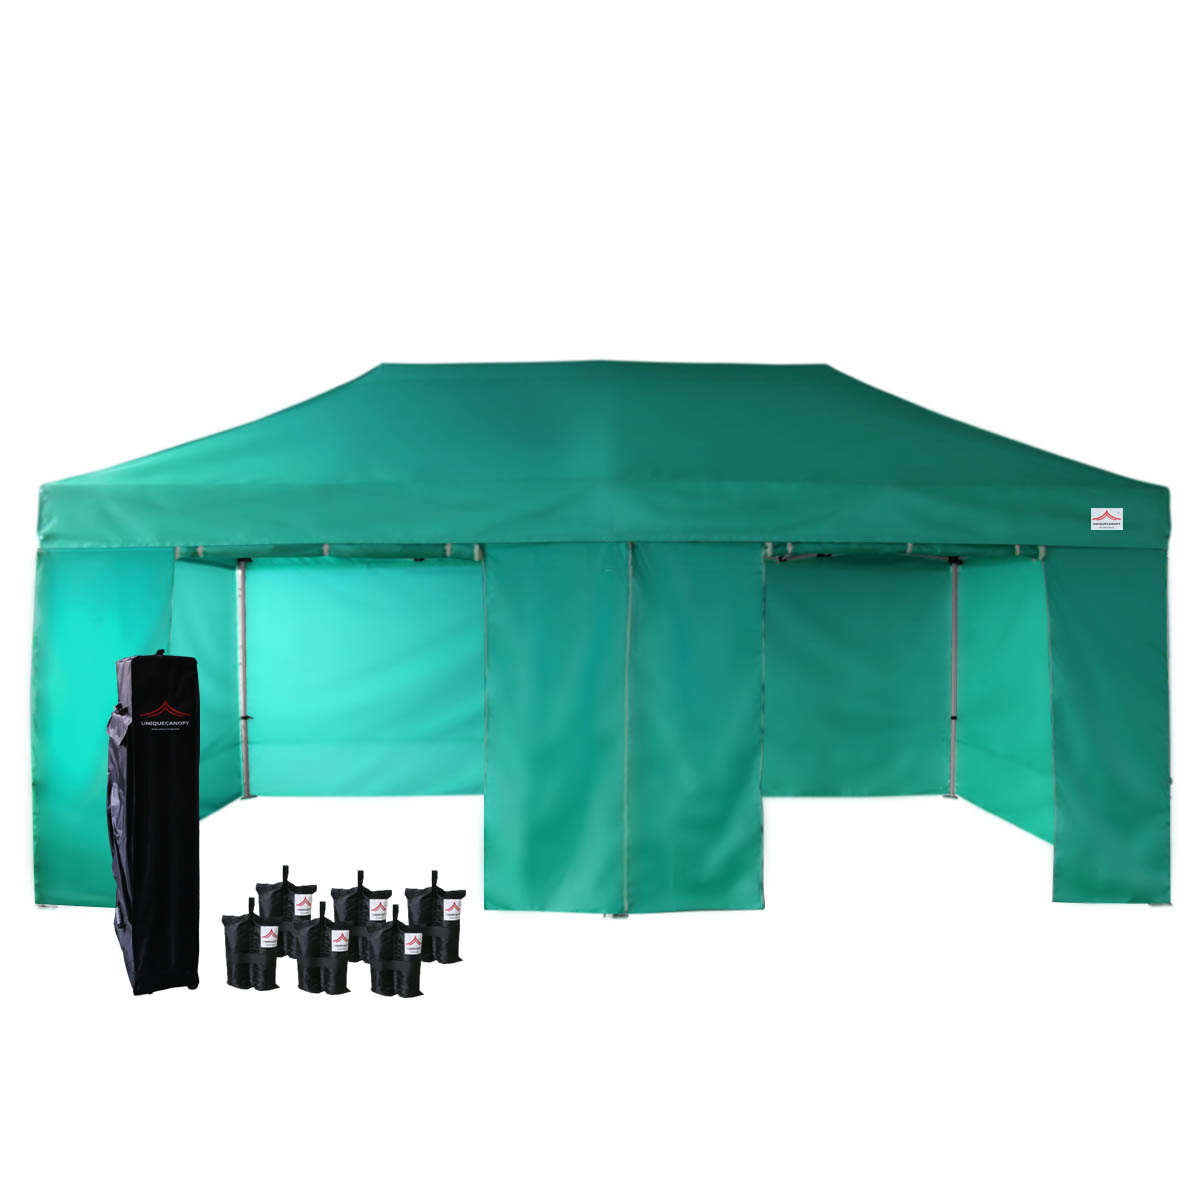 with 4 Removable Zippered Side Walls and Heavy Duty Roller Bag 6 Sand Bags Green UNIQUECANOPY 10x20 Ez Pop Up Canopy Tent Commercial Instant Shelter 